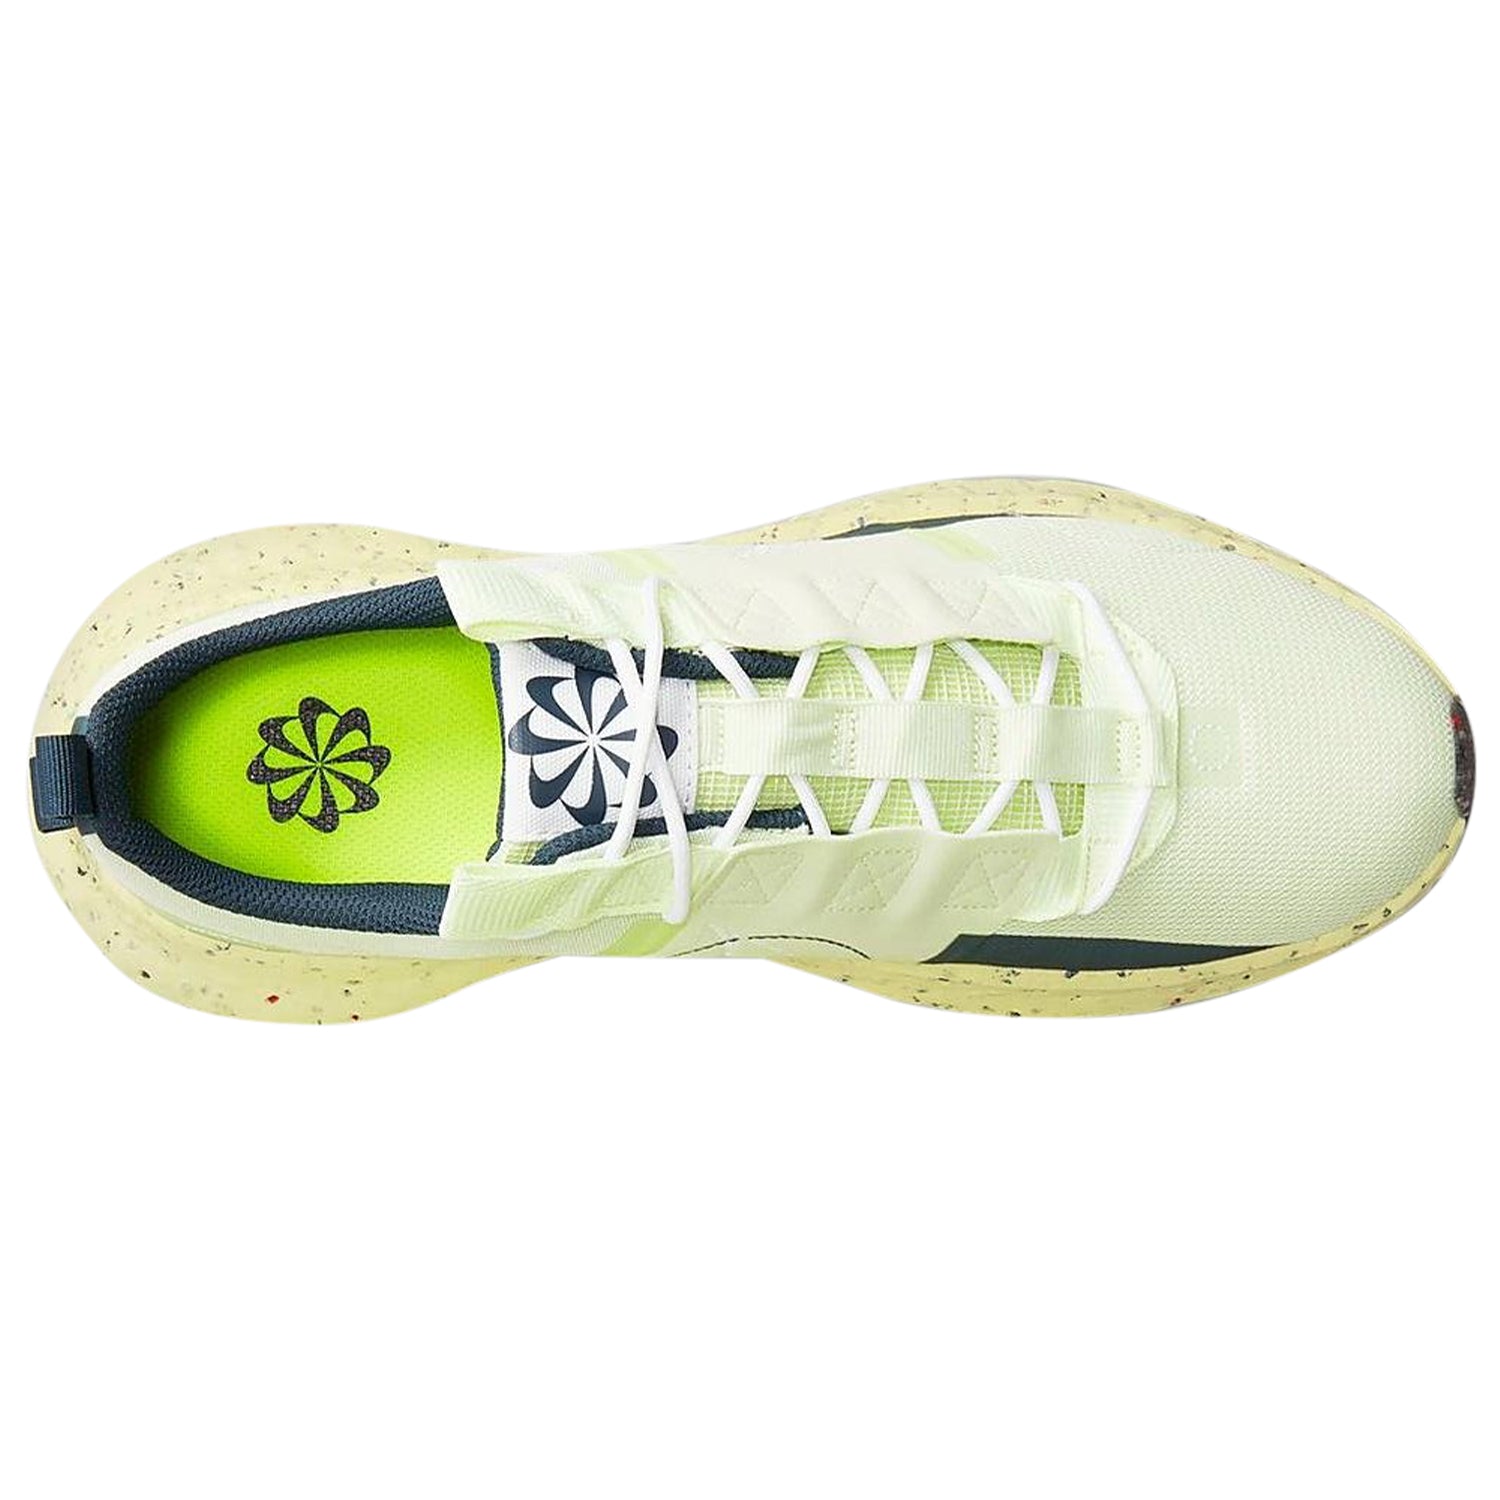 Nike Crater Impact Mens Style : Db2477-310